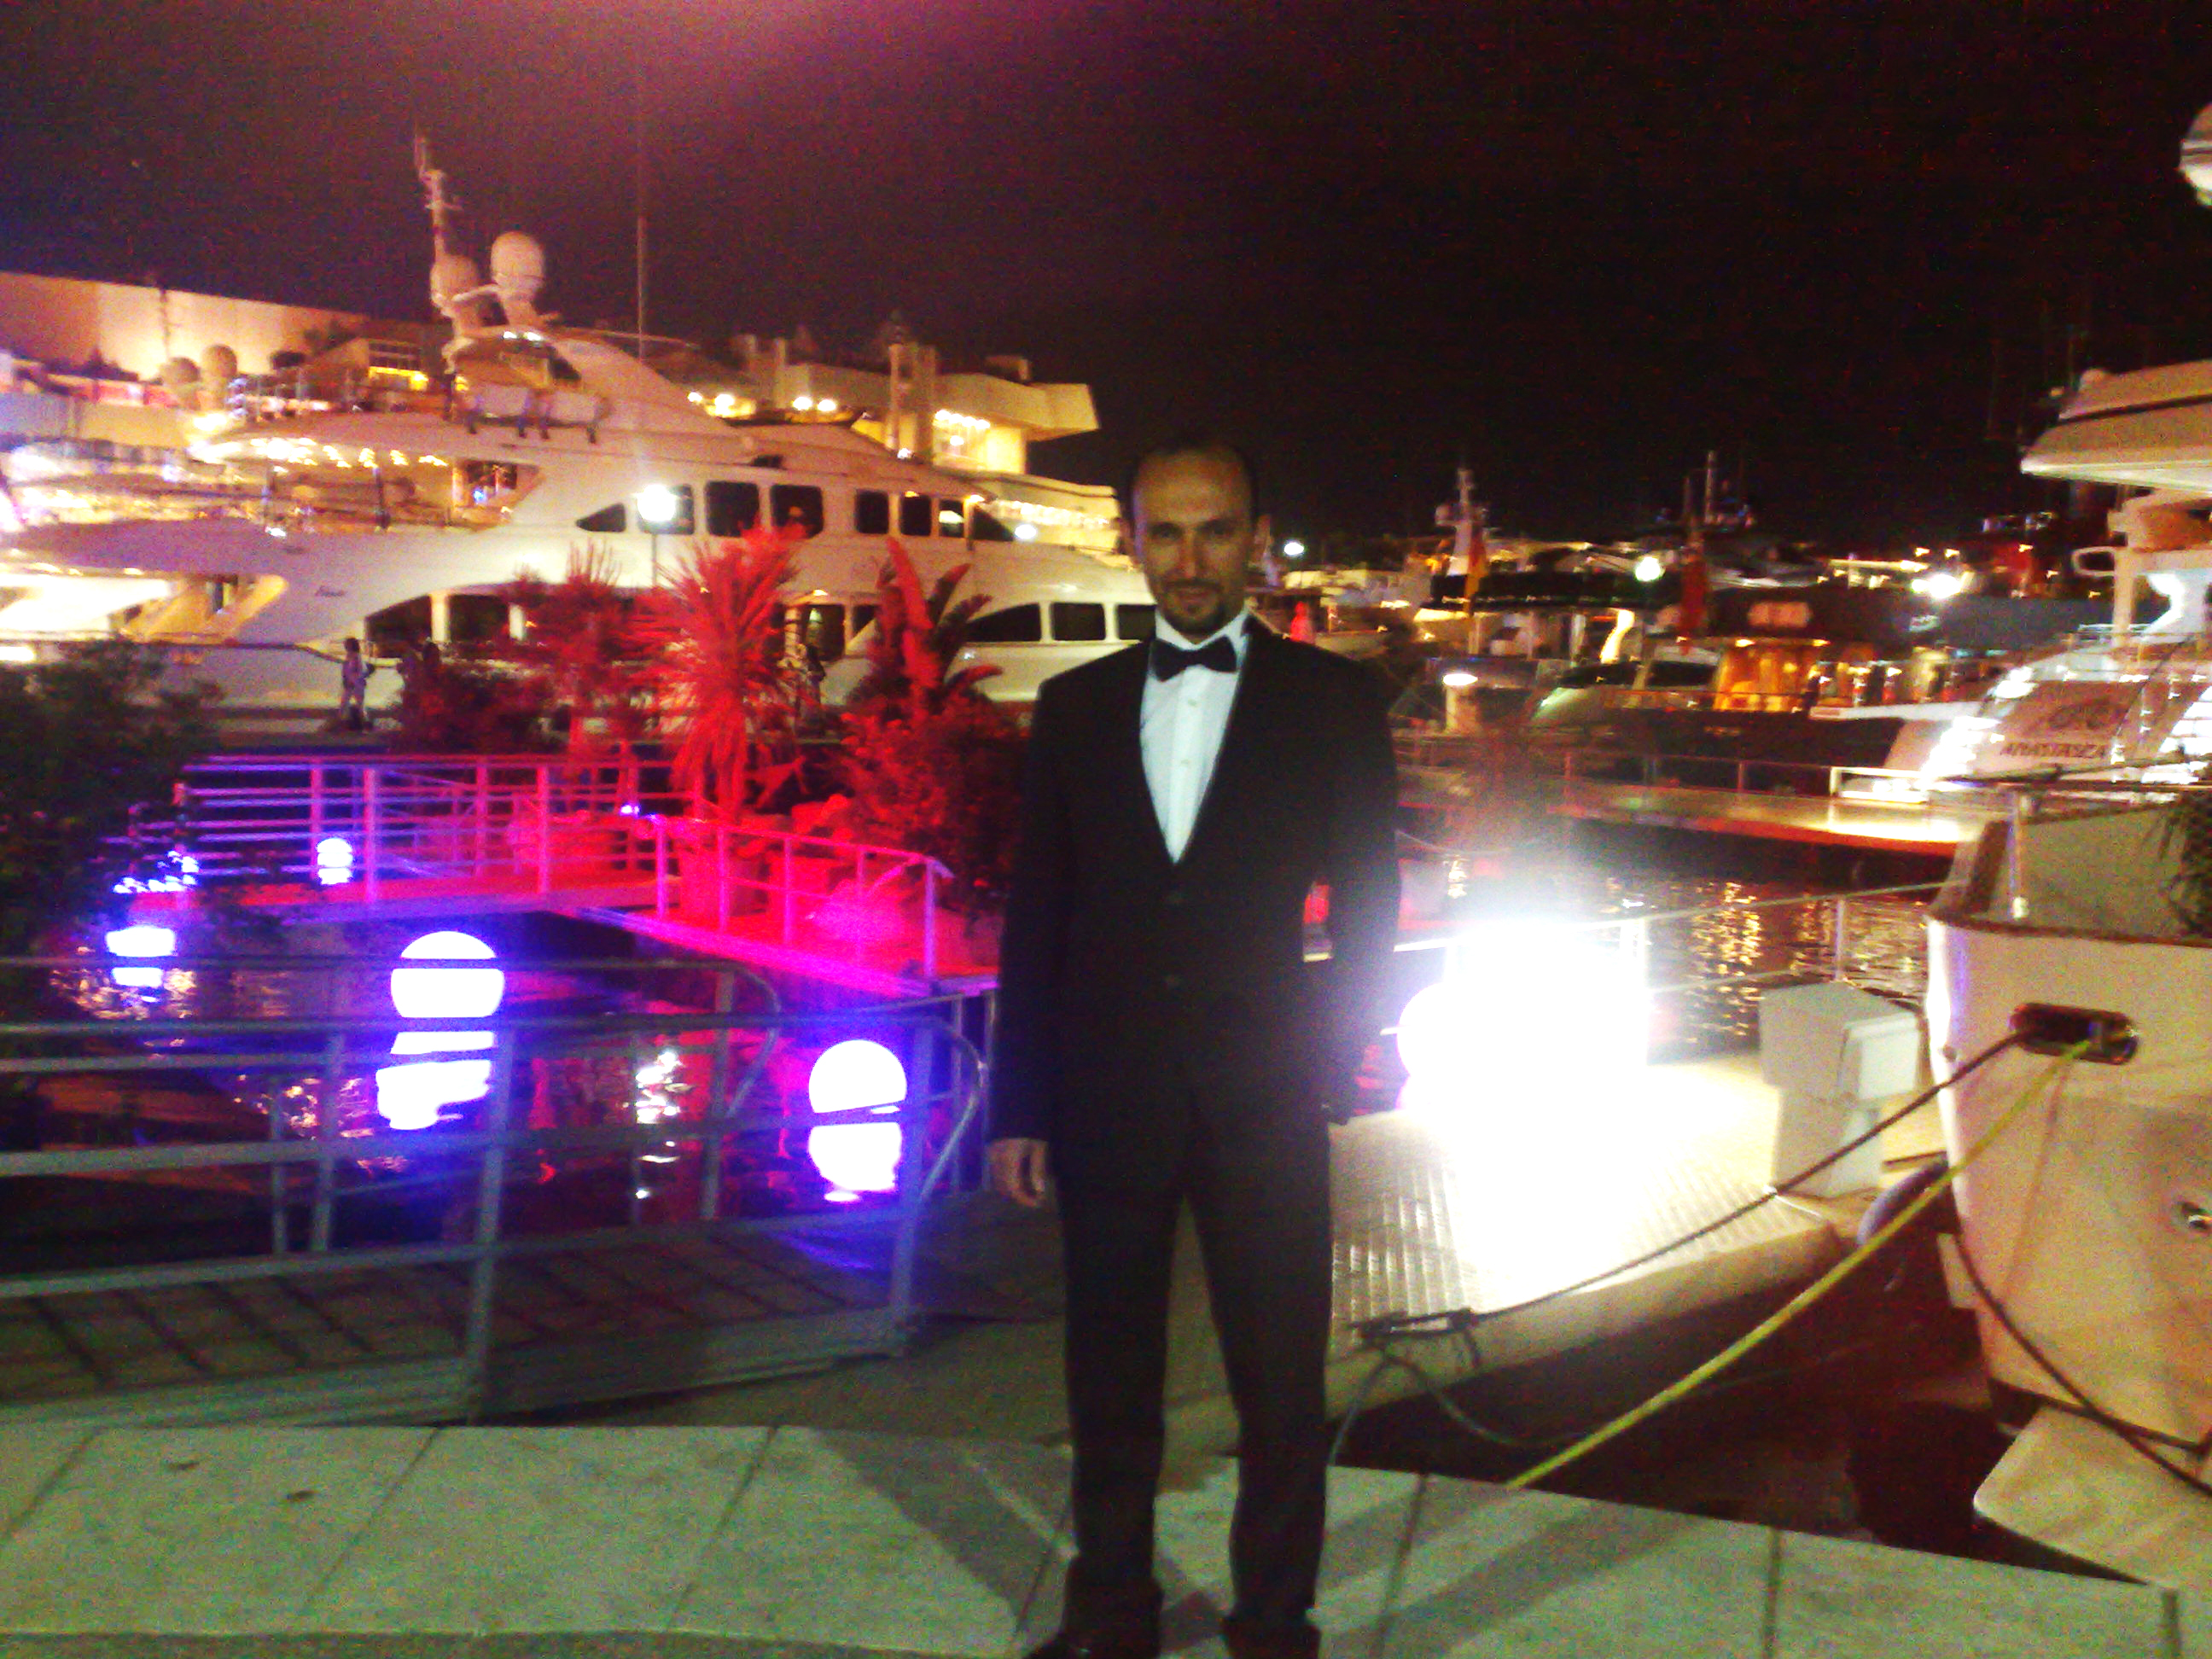 Cela Yildiz ready for another premiere, another amazing night at Film Festival 2009. Yes we Cannes !